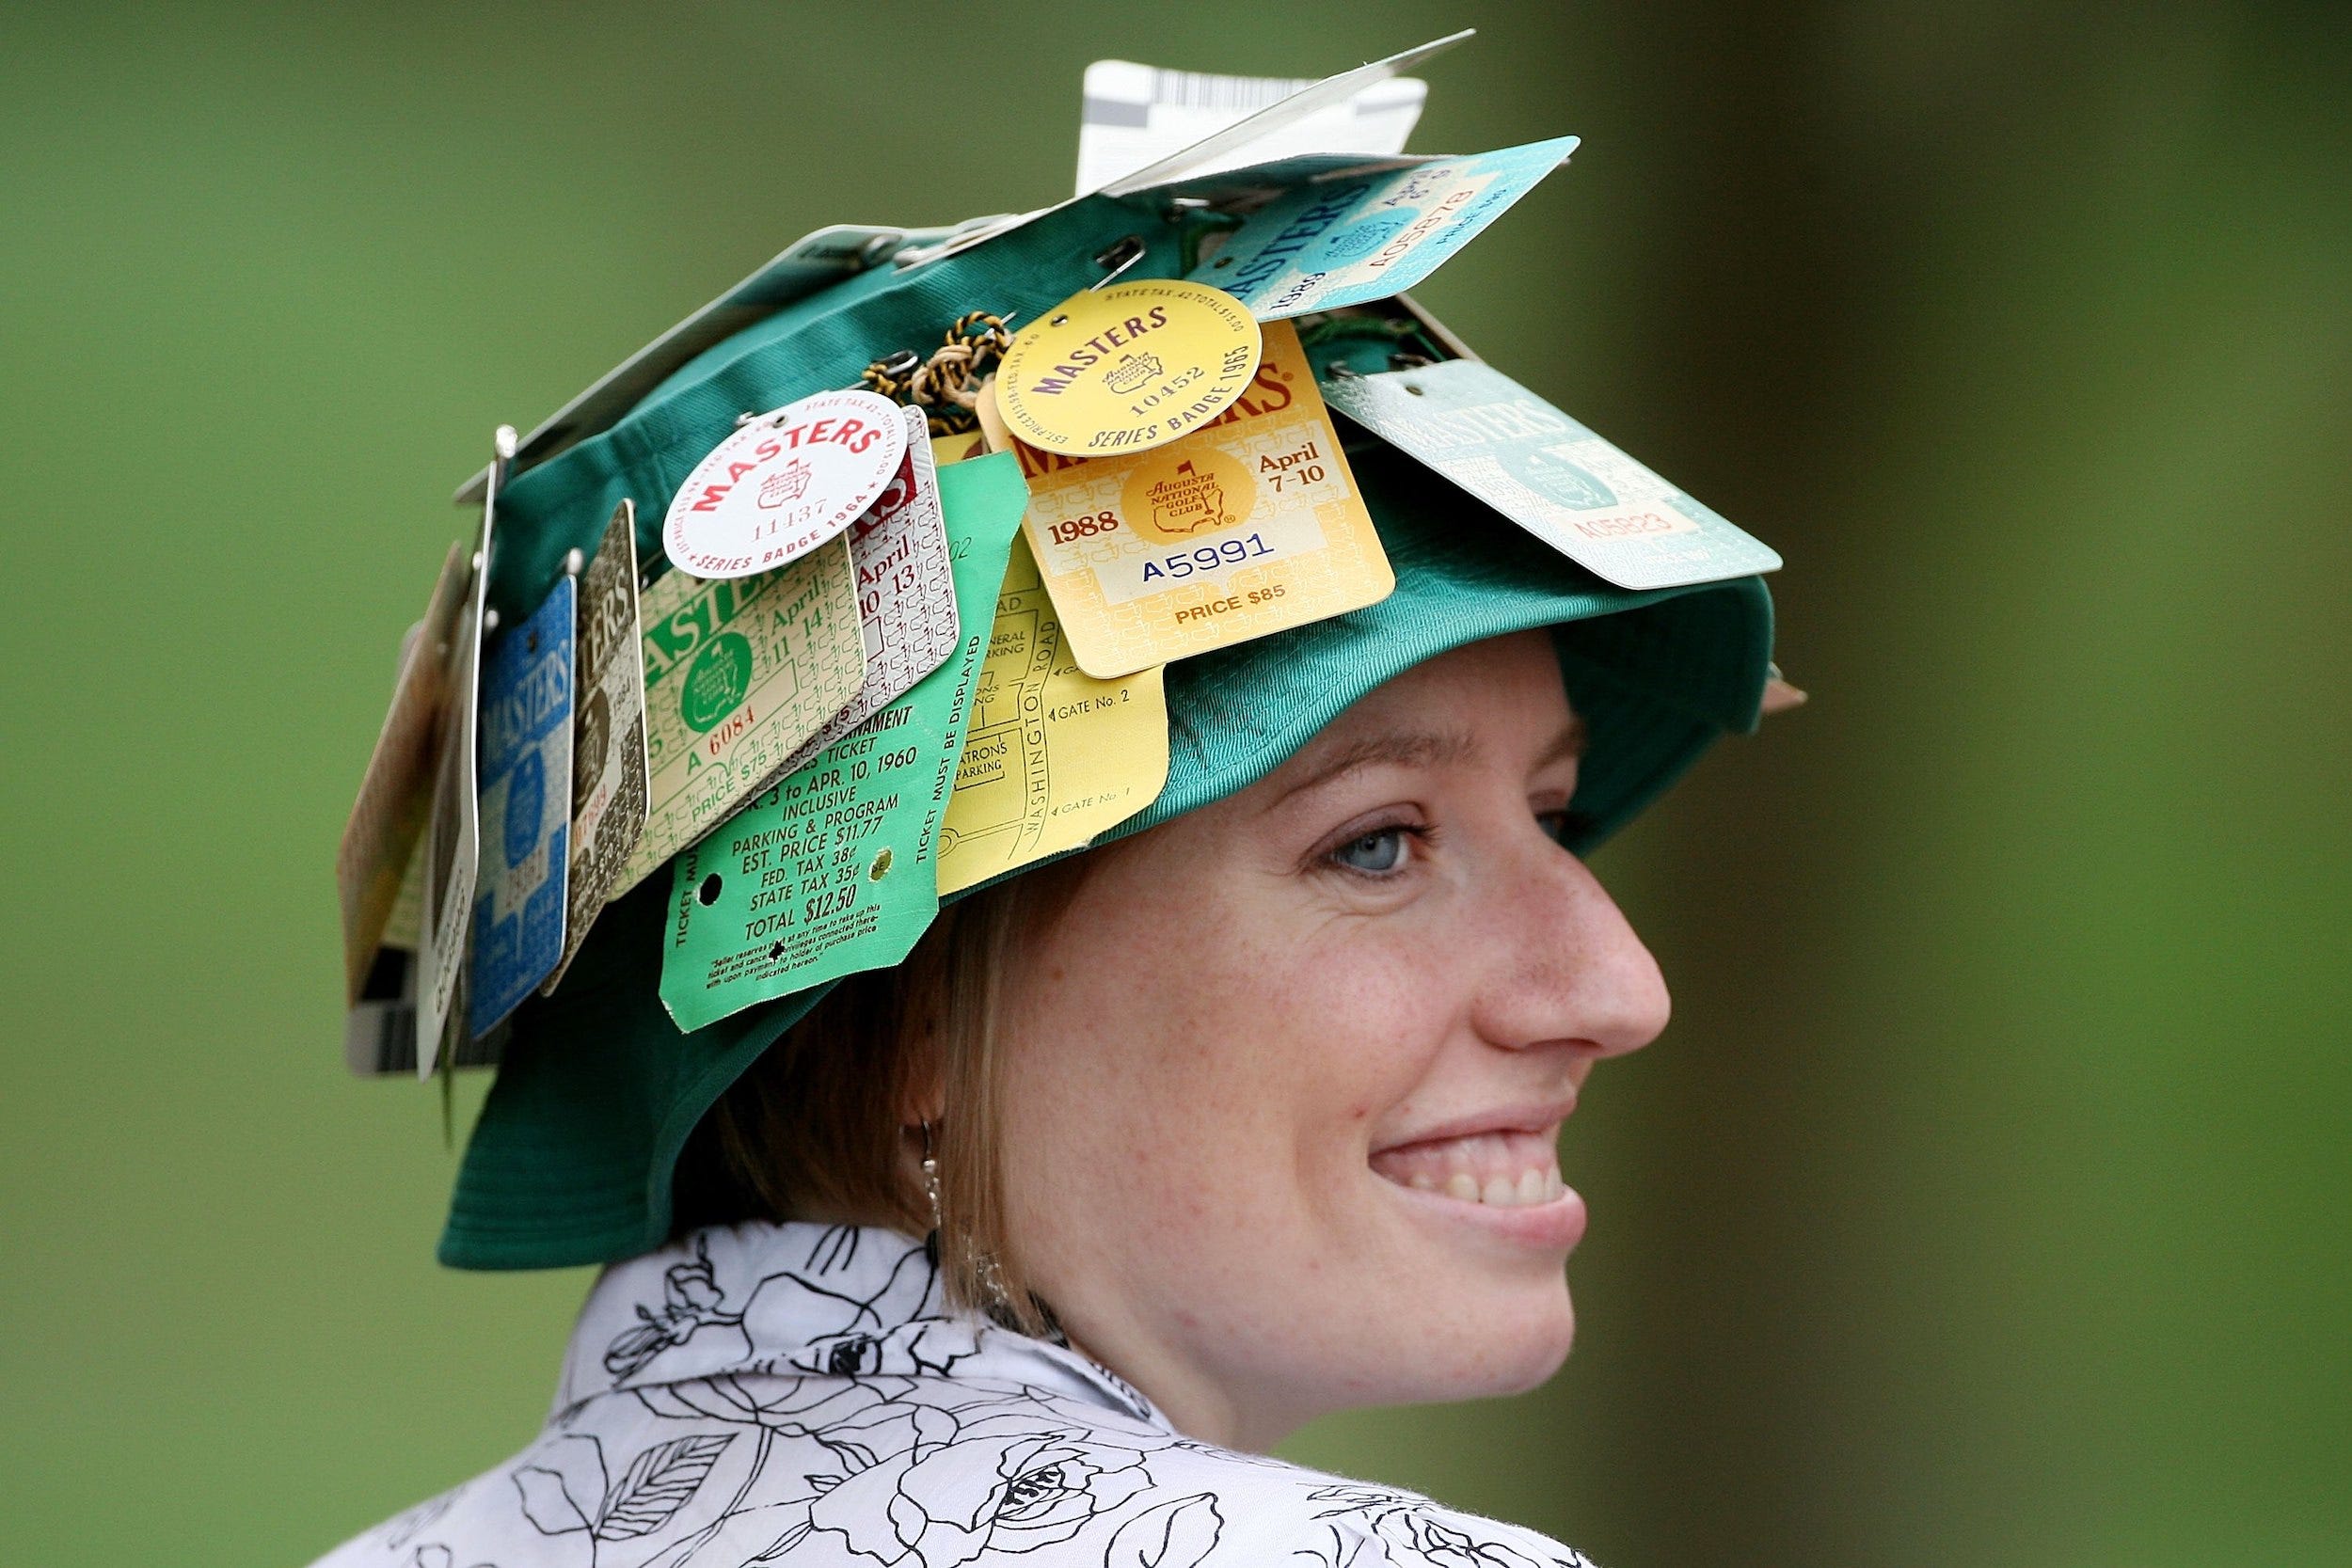 Score The Best Deals: Finding Out How Much Masters Tickets Really Cost